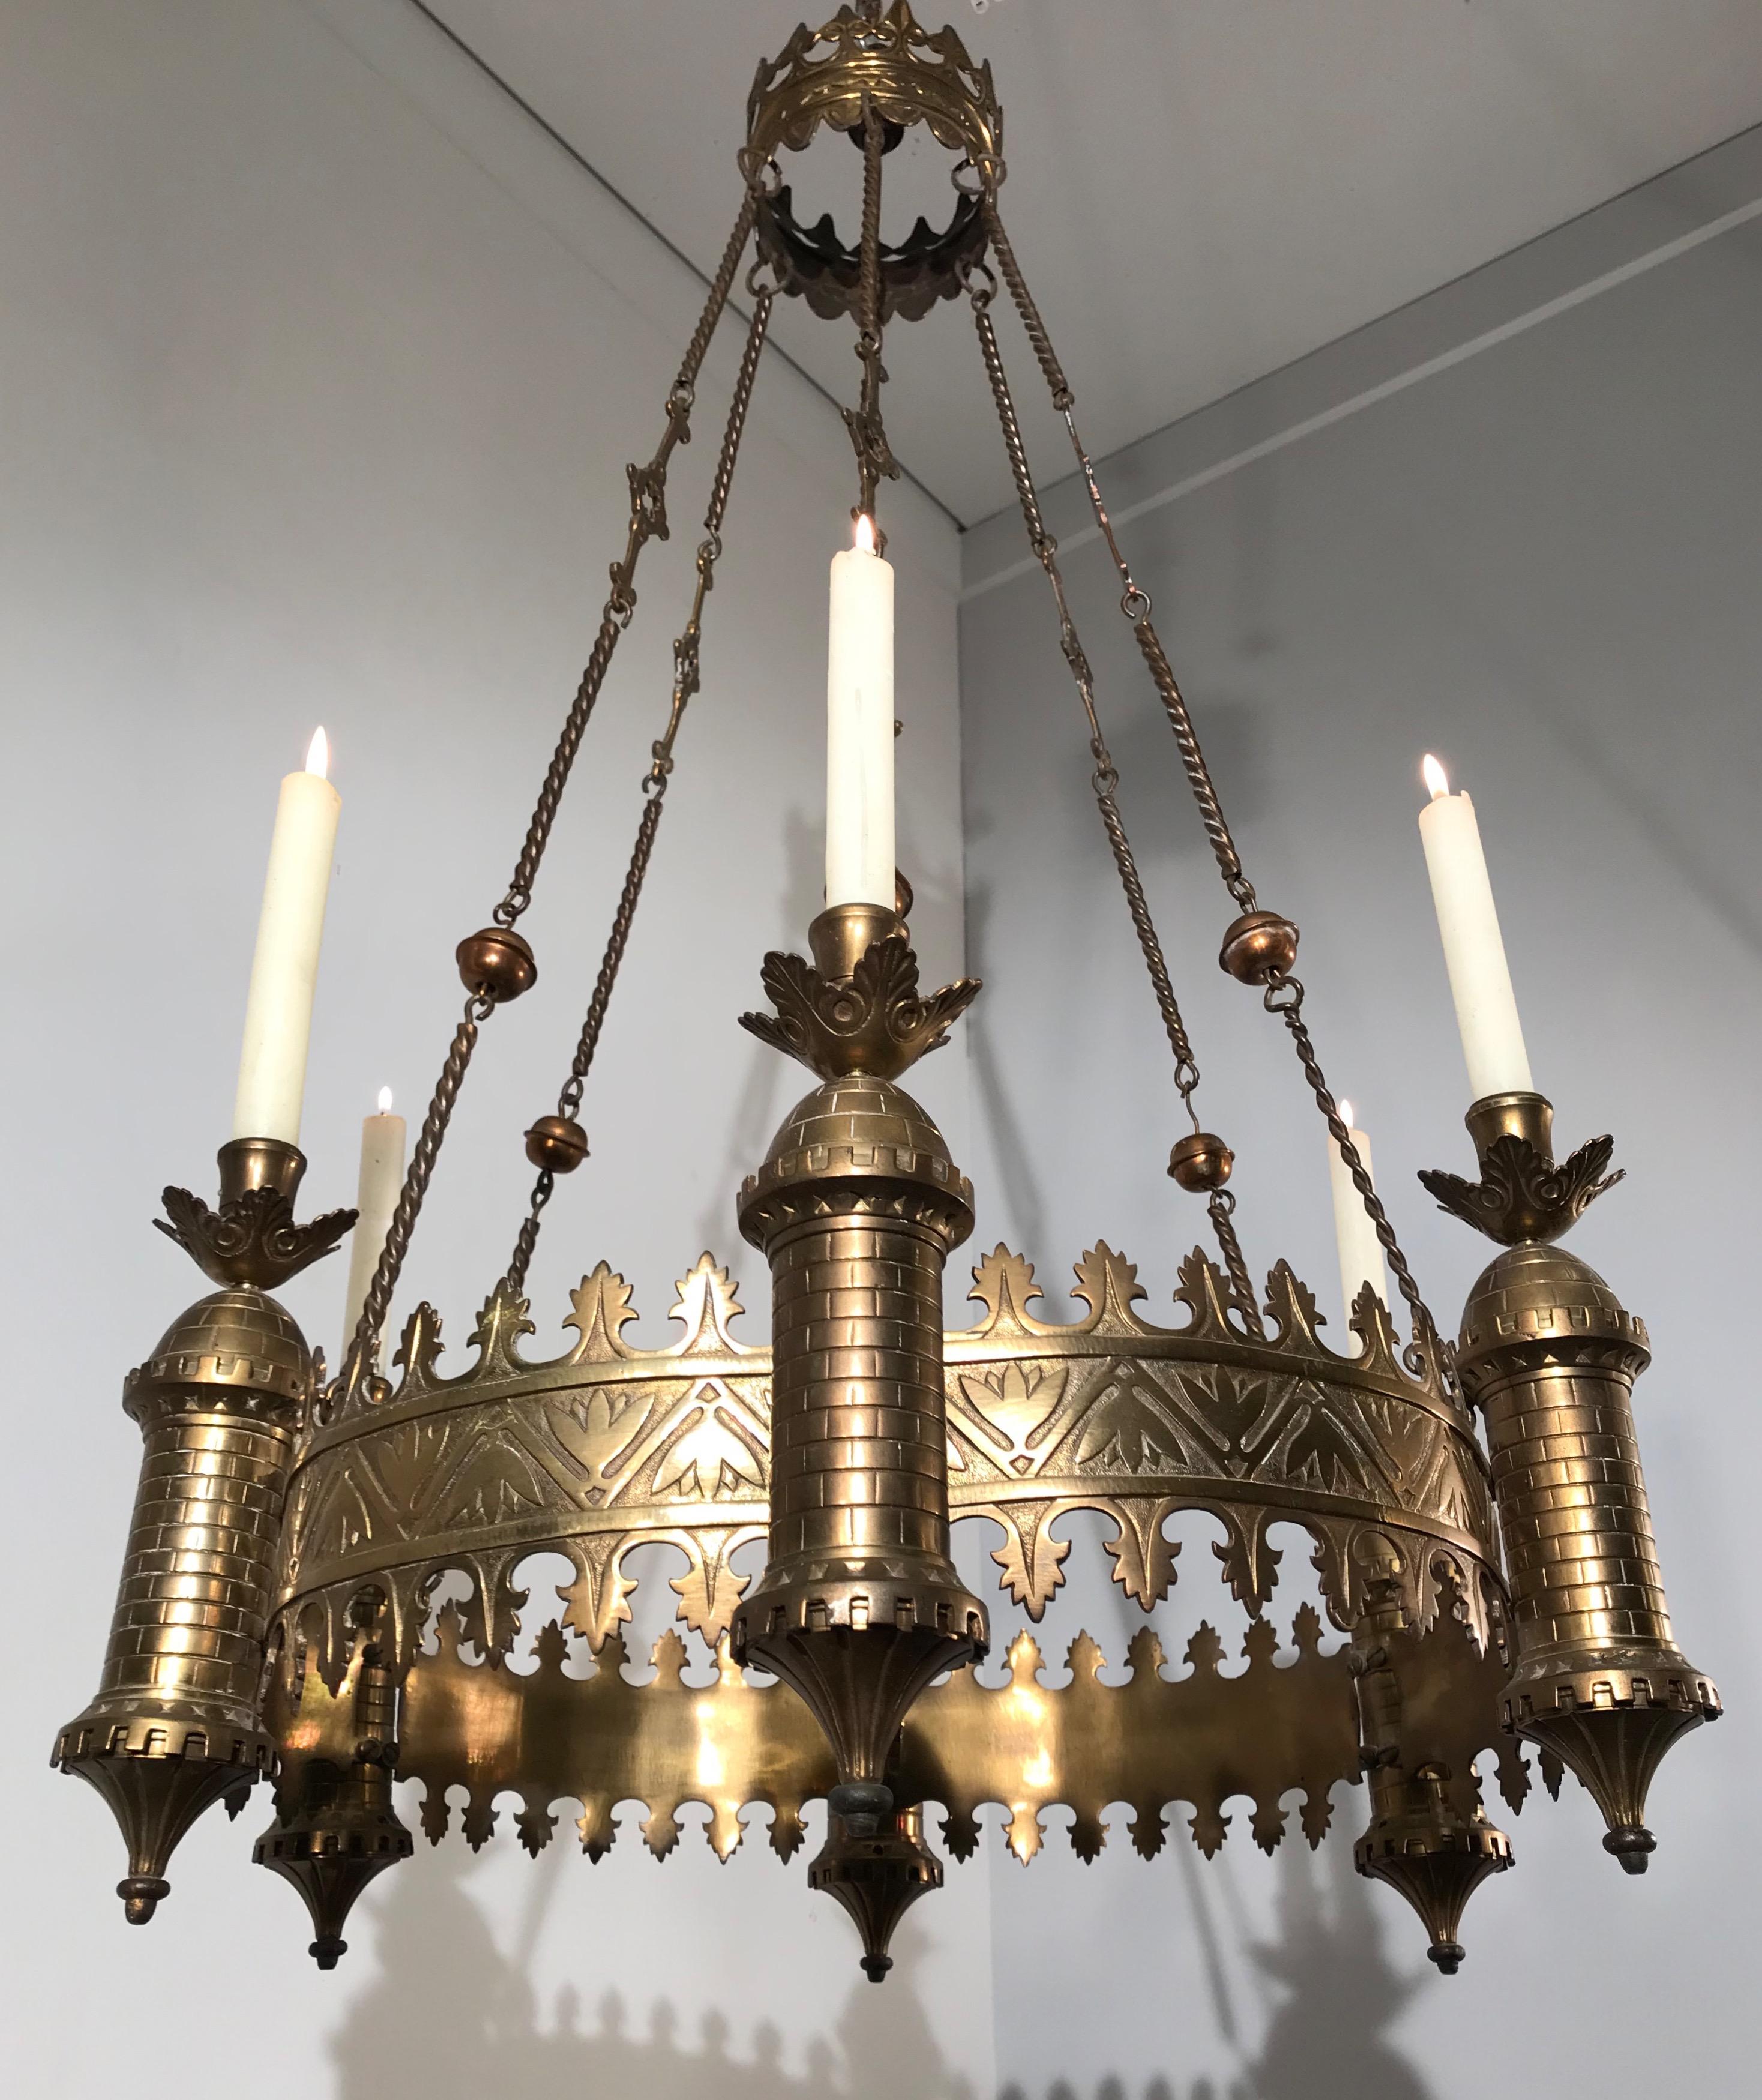 Stunning and handcrafted, medieval castle theme pendant from the late 1800s.

This candle chandelier from the 1880s is another one of our recent great finds. This Gothic Revival chandelier shows that in the late 1800s many of the pieces that were